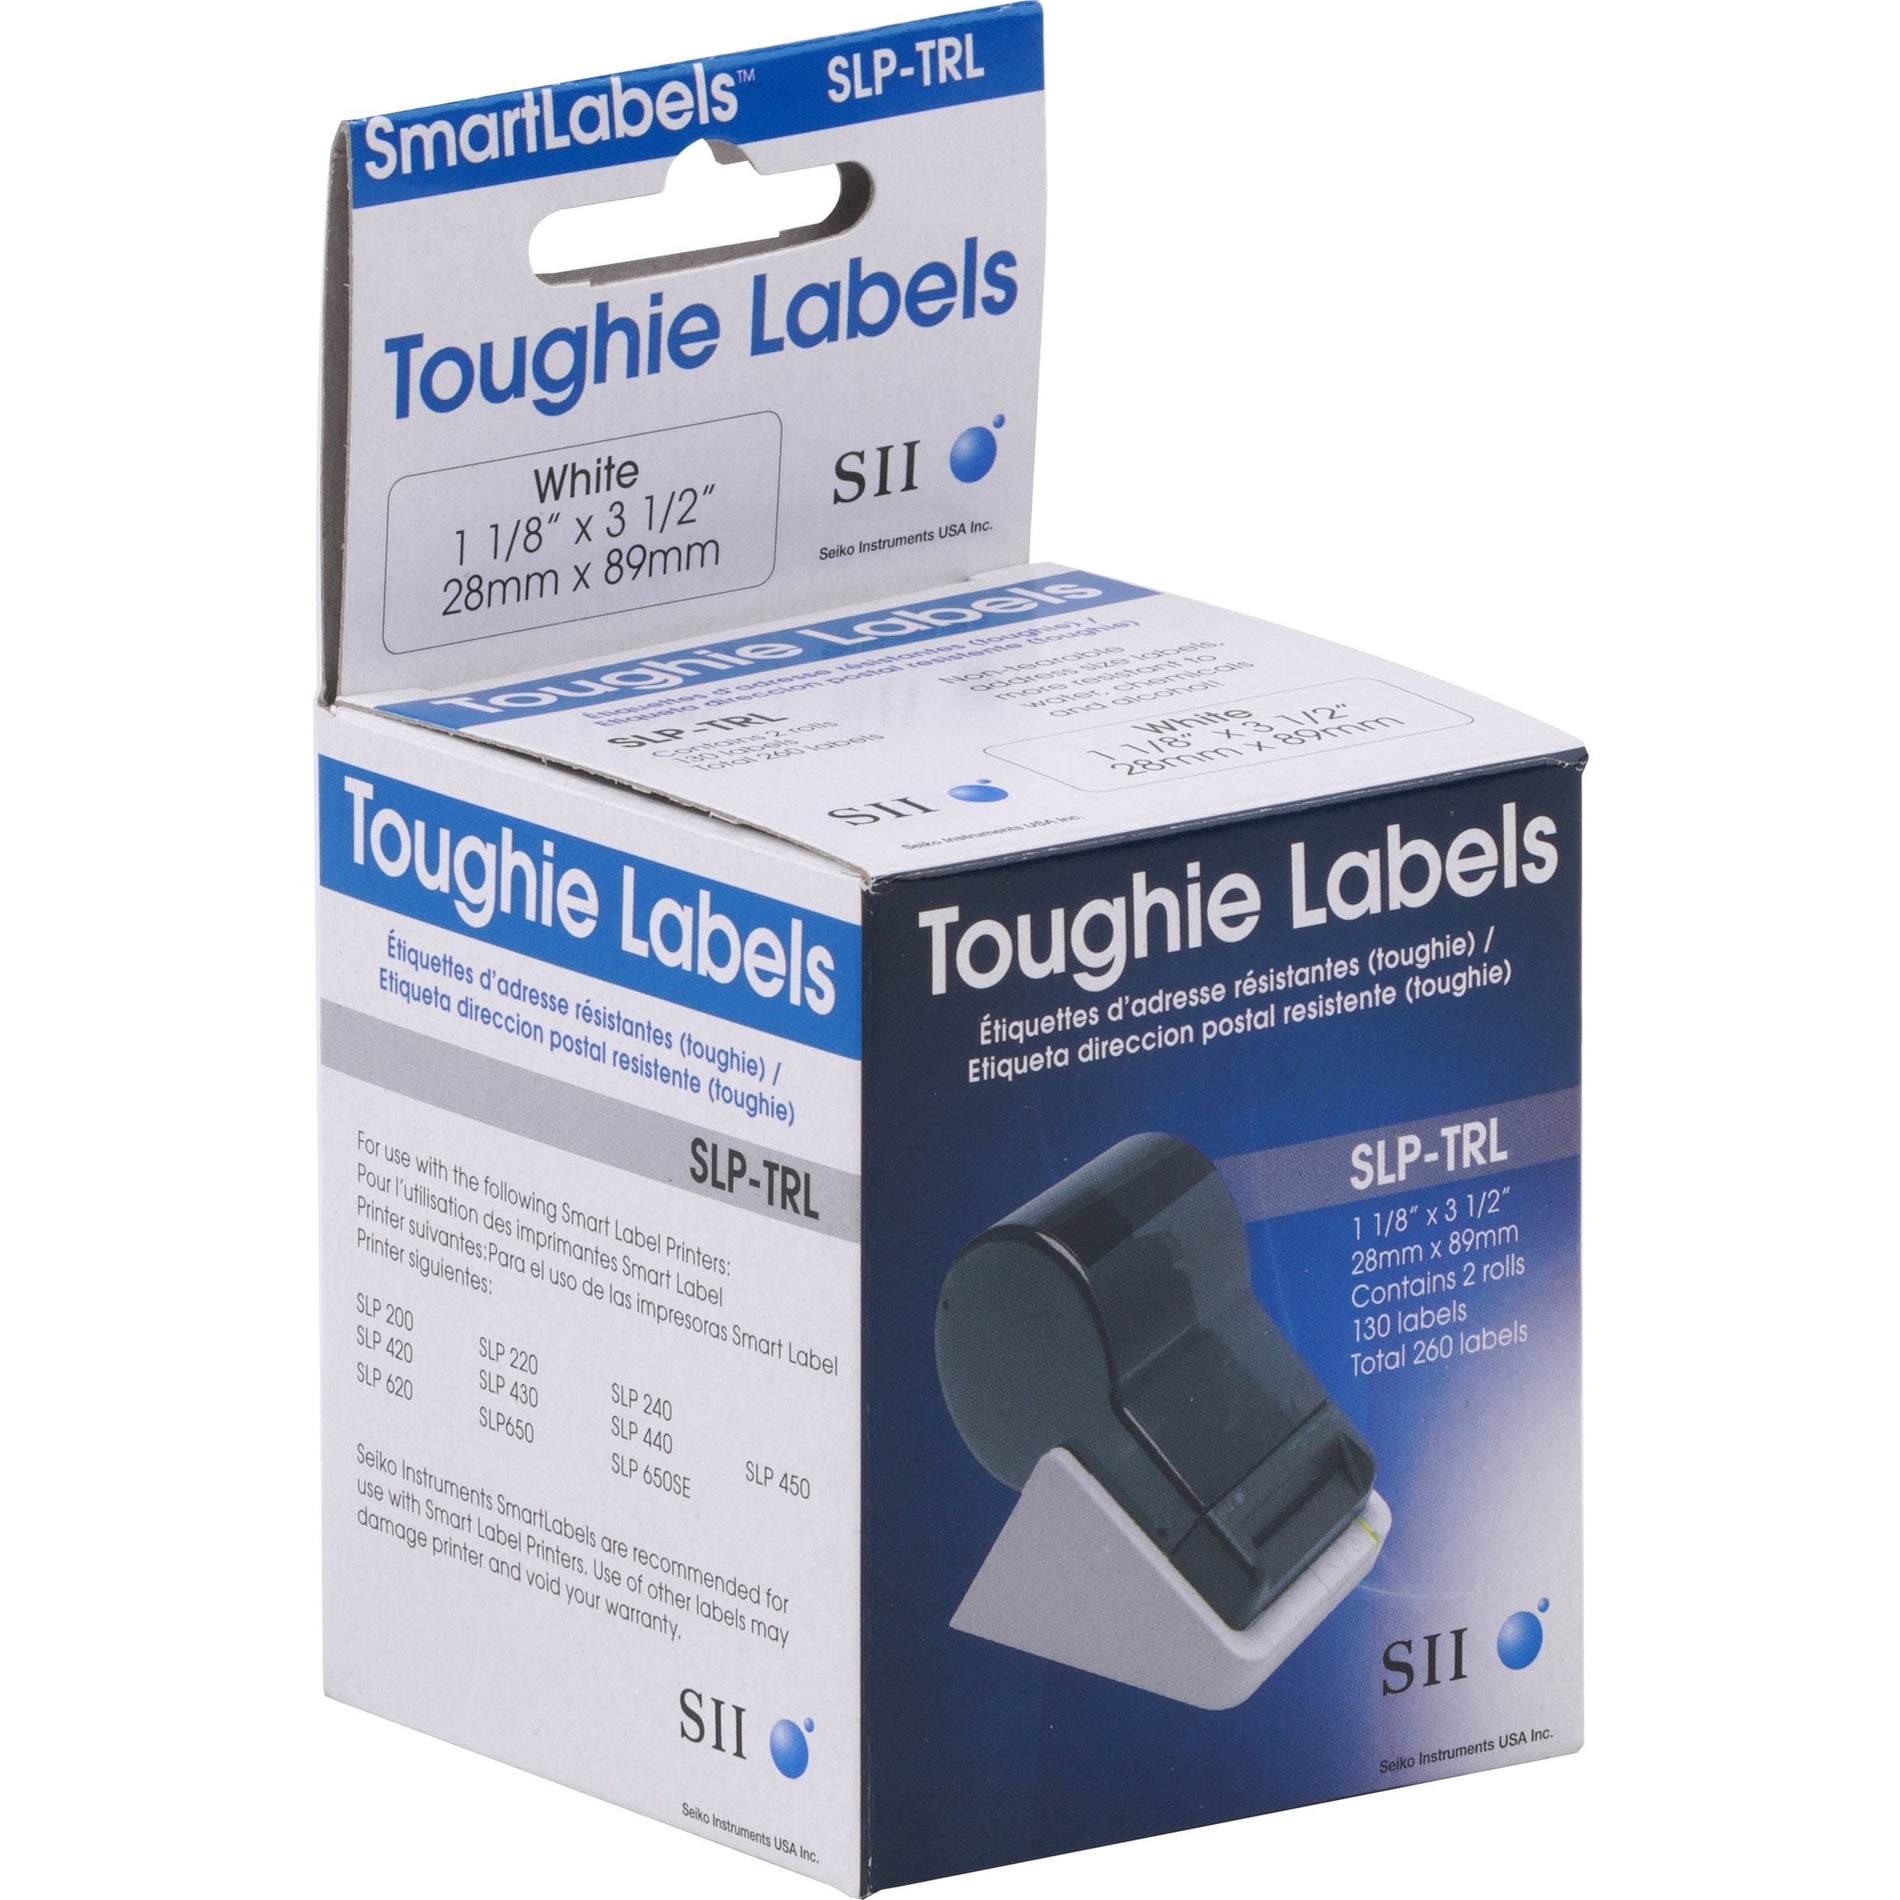 Seiko SLP-TRL SmartLabel Toughie Address Label, Tear and Chemical Resistant, 1 1/8" x 3 1/2", 2 Roll